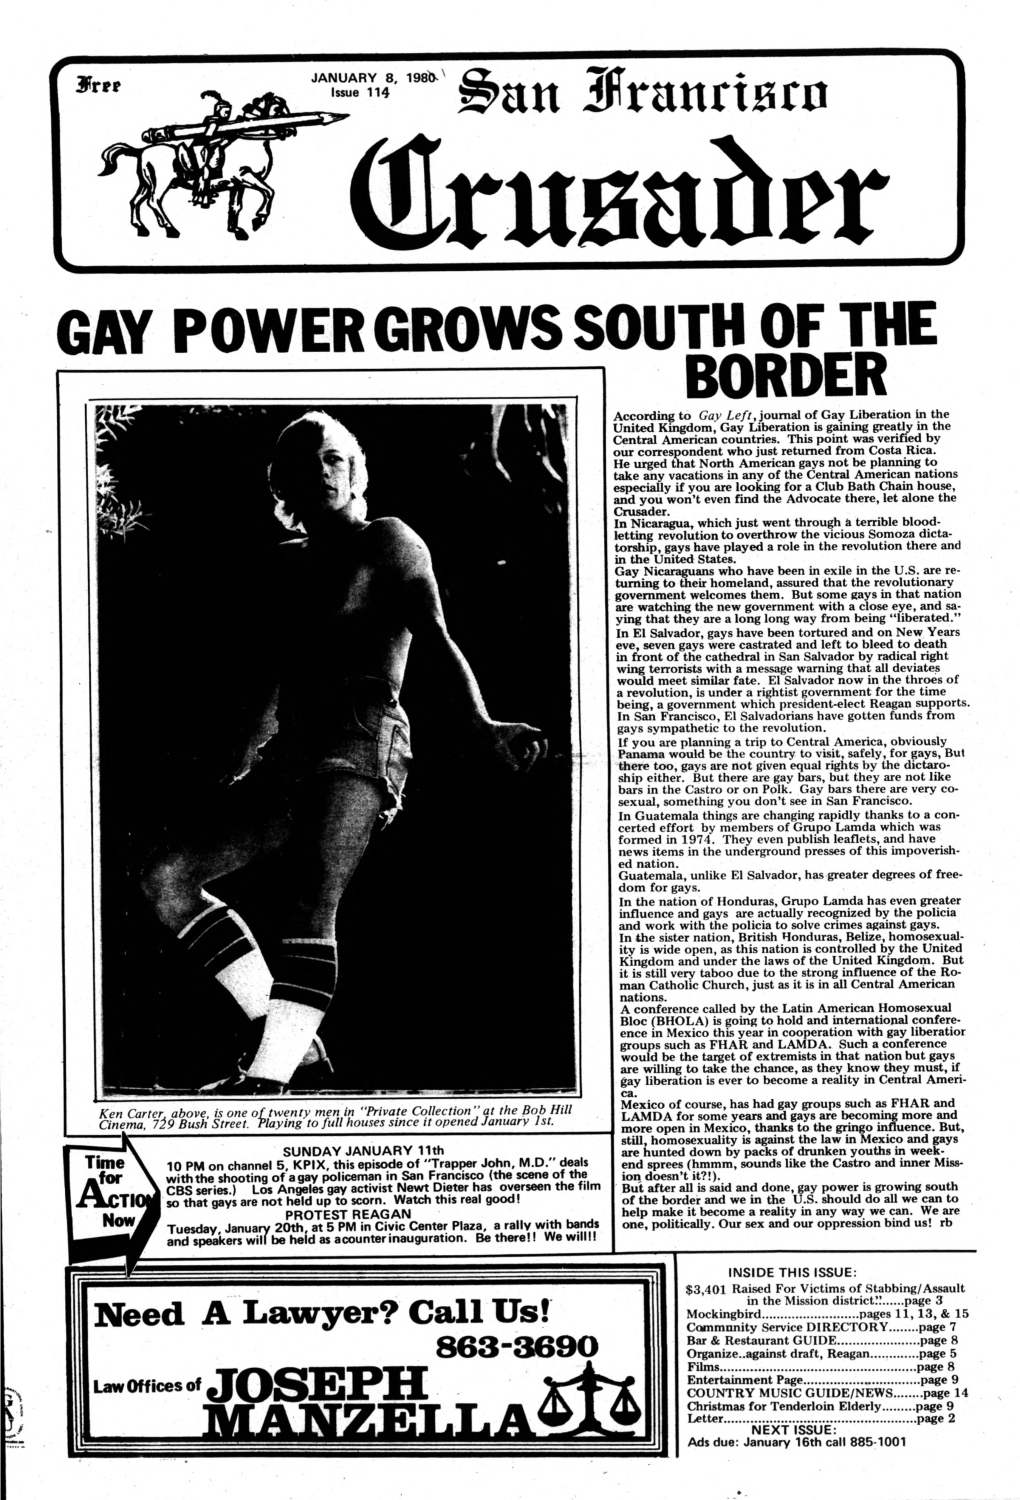 Gay Power Grows South of the Border